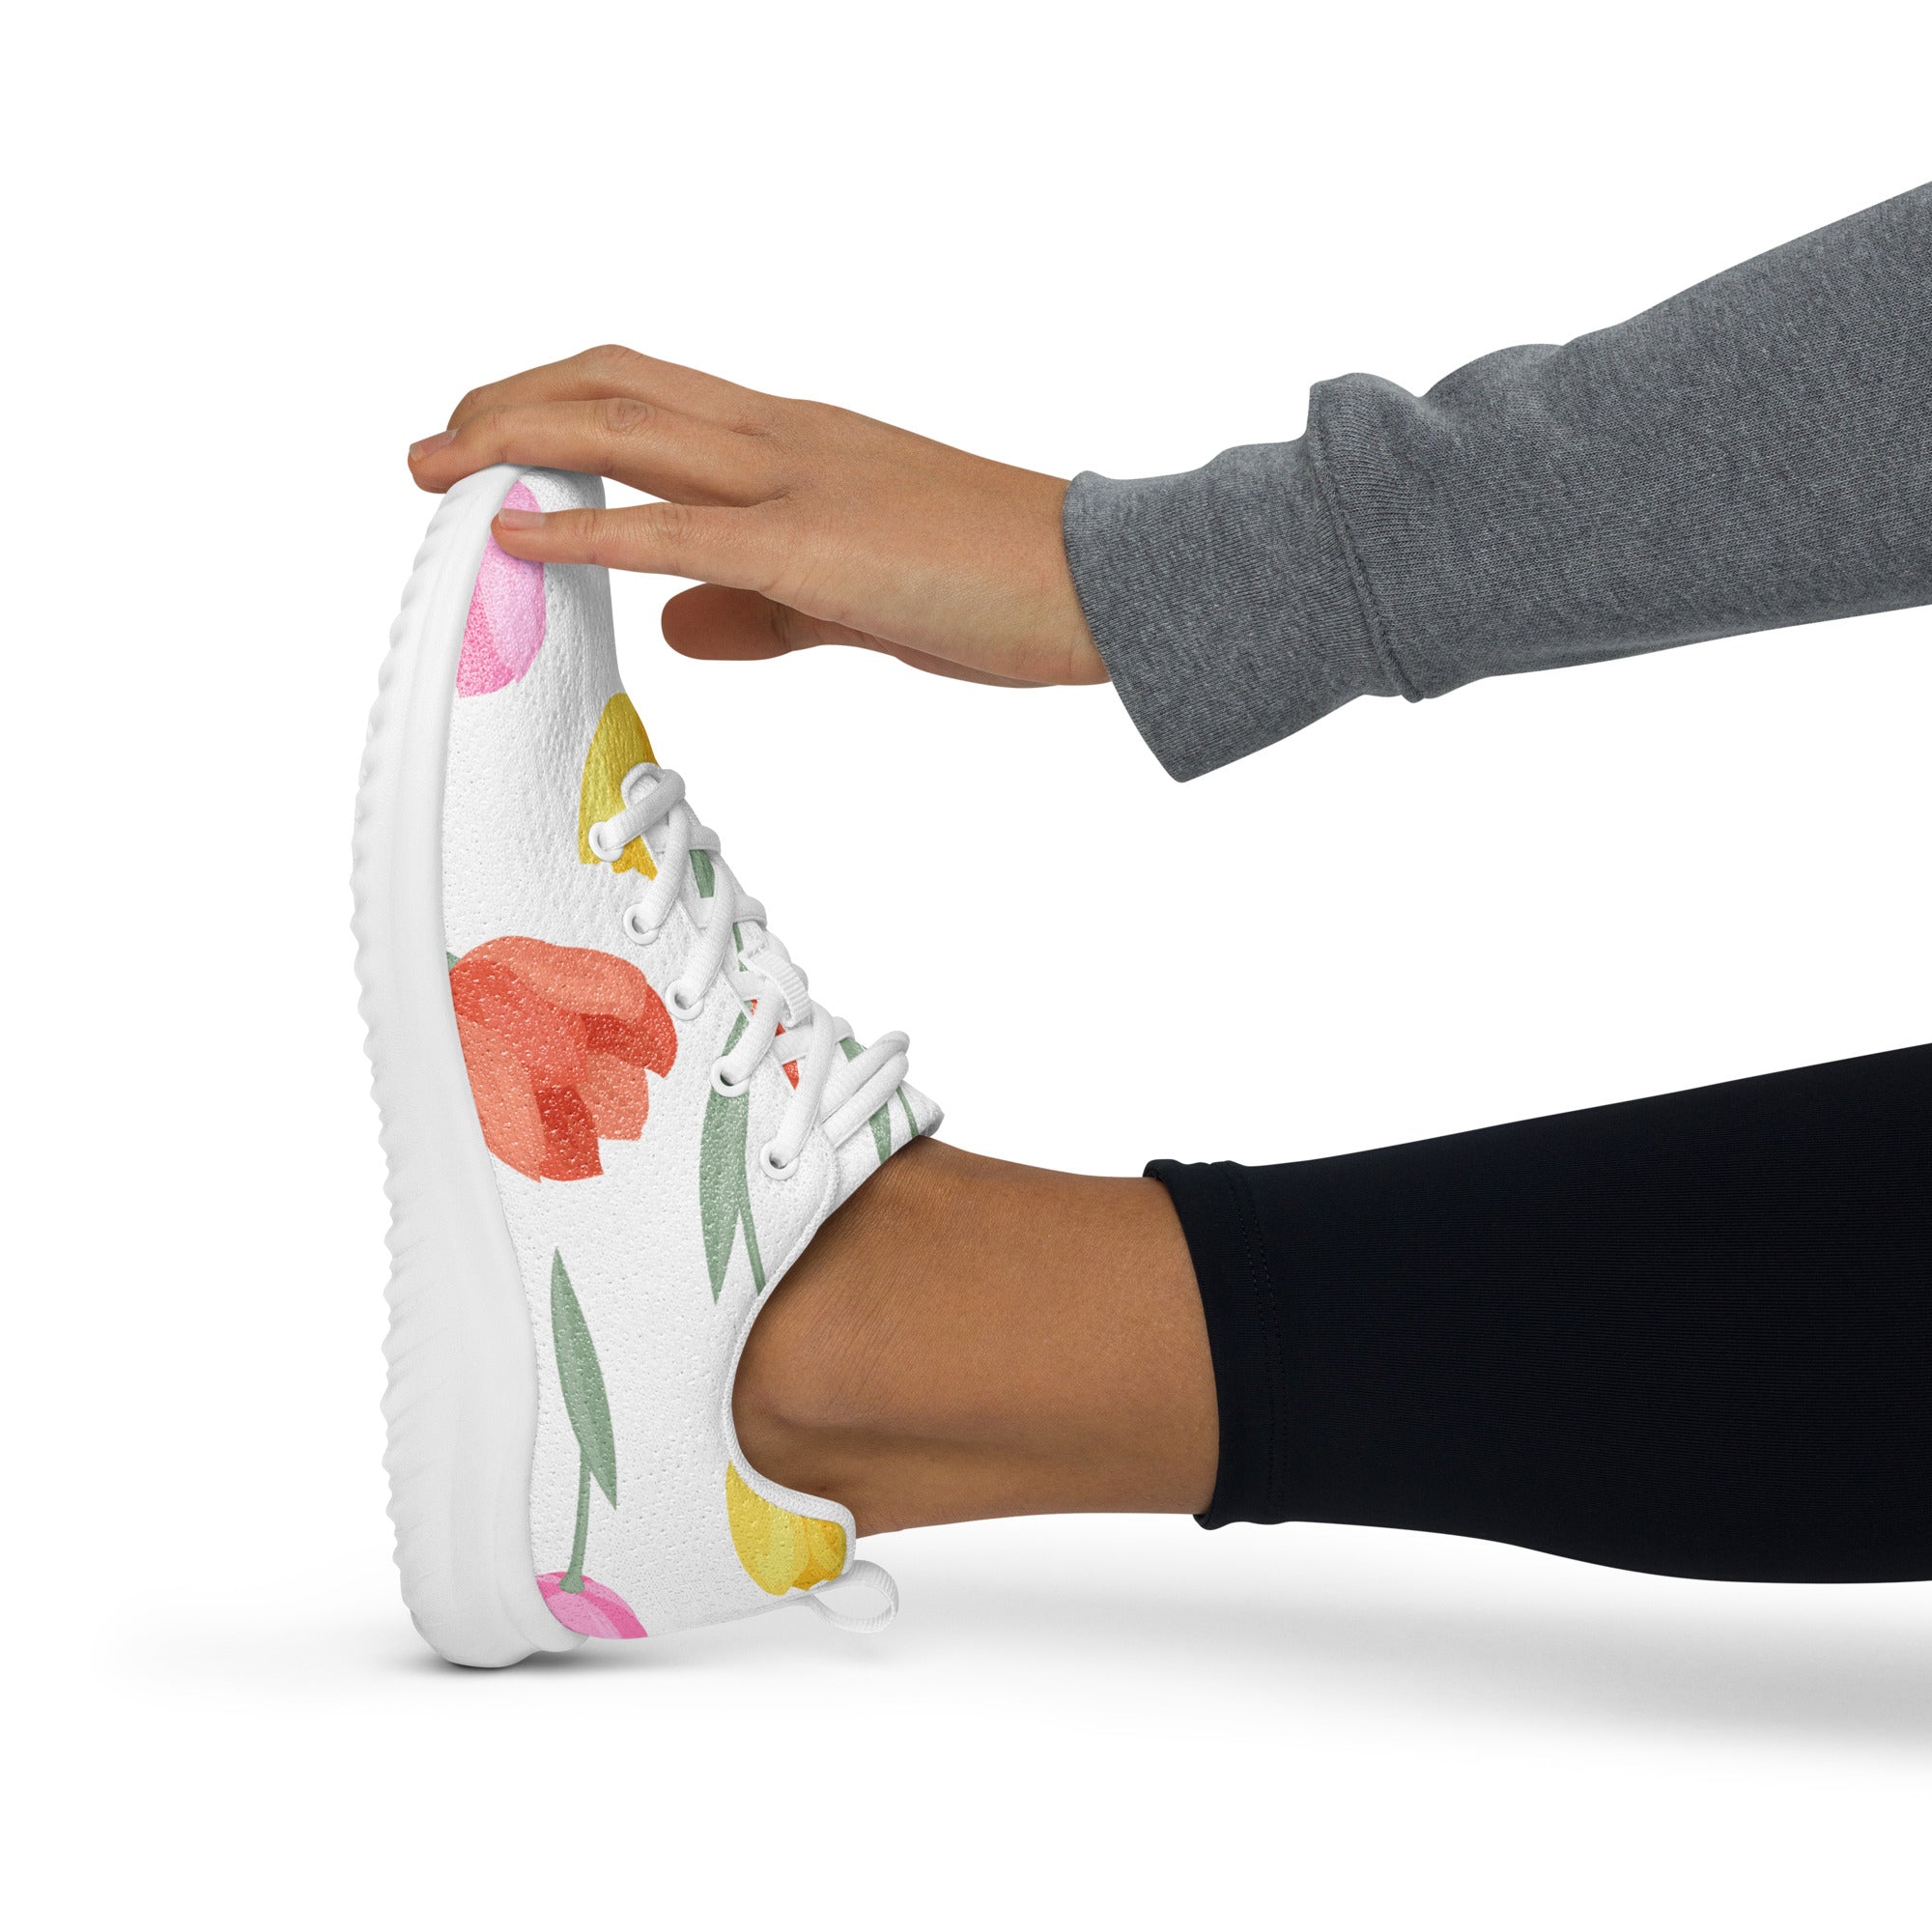 Women’s Tiny Colourful Tulips Athletic Sneaker - Arcadia Apparel